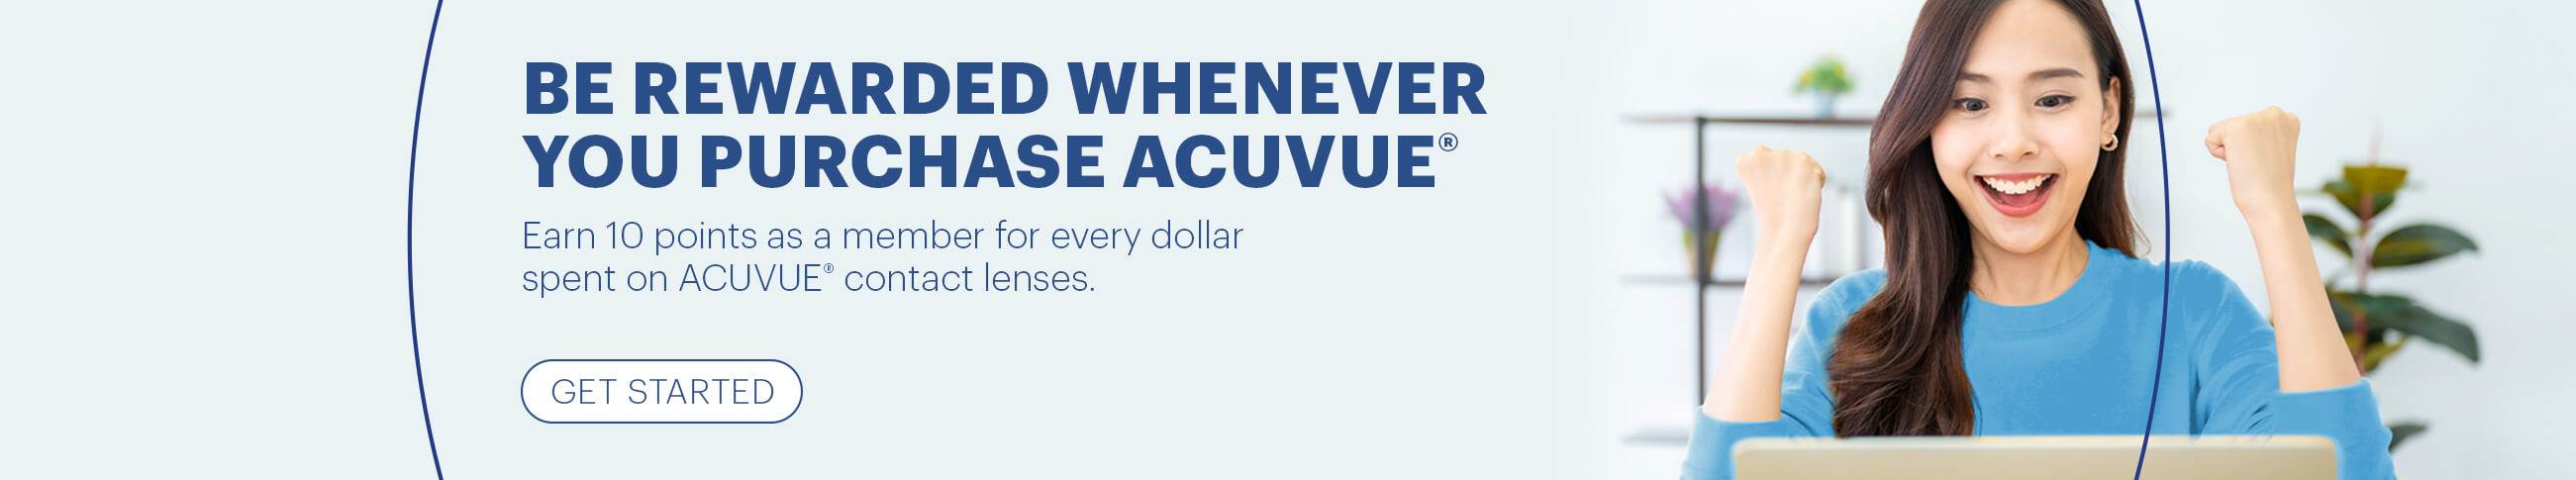 Join the MyACUVUE® membership to earn points when purchasing ACUVUE® products - banner 